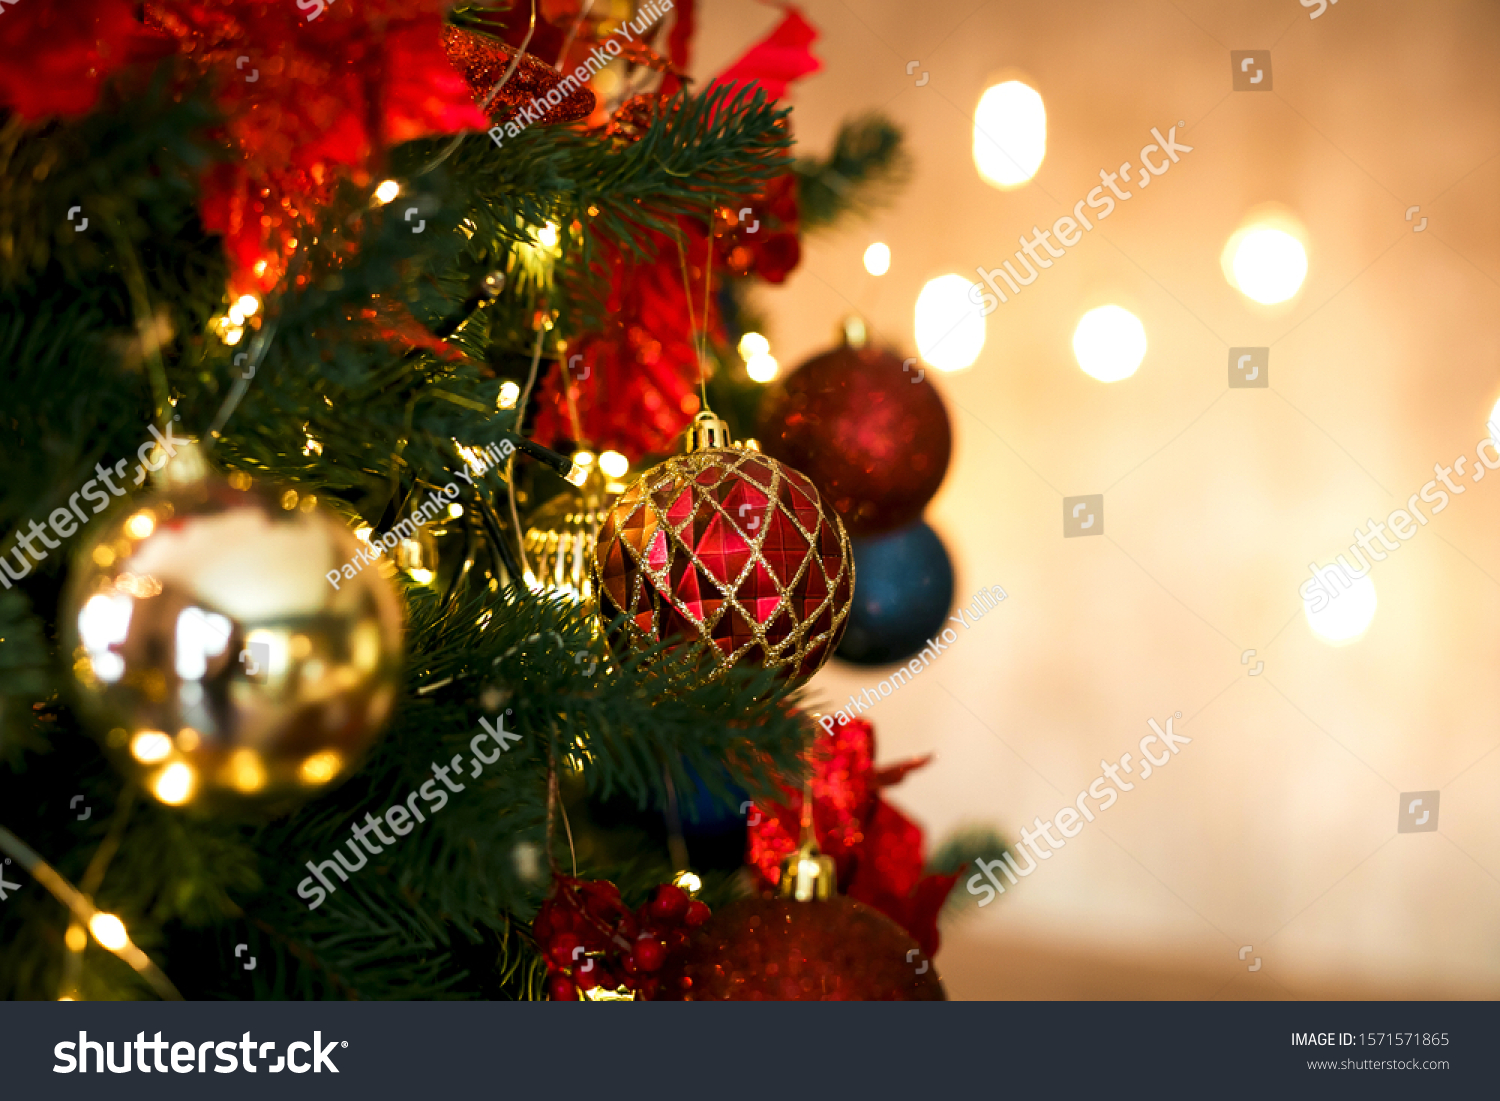 
Red and gold balls of Christmas tree decoration in classic colors. #1571571865